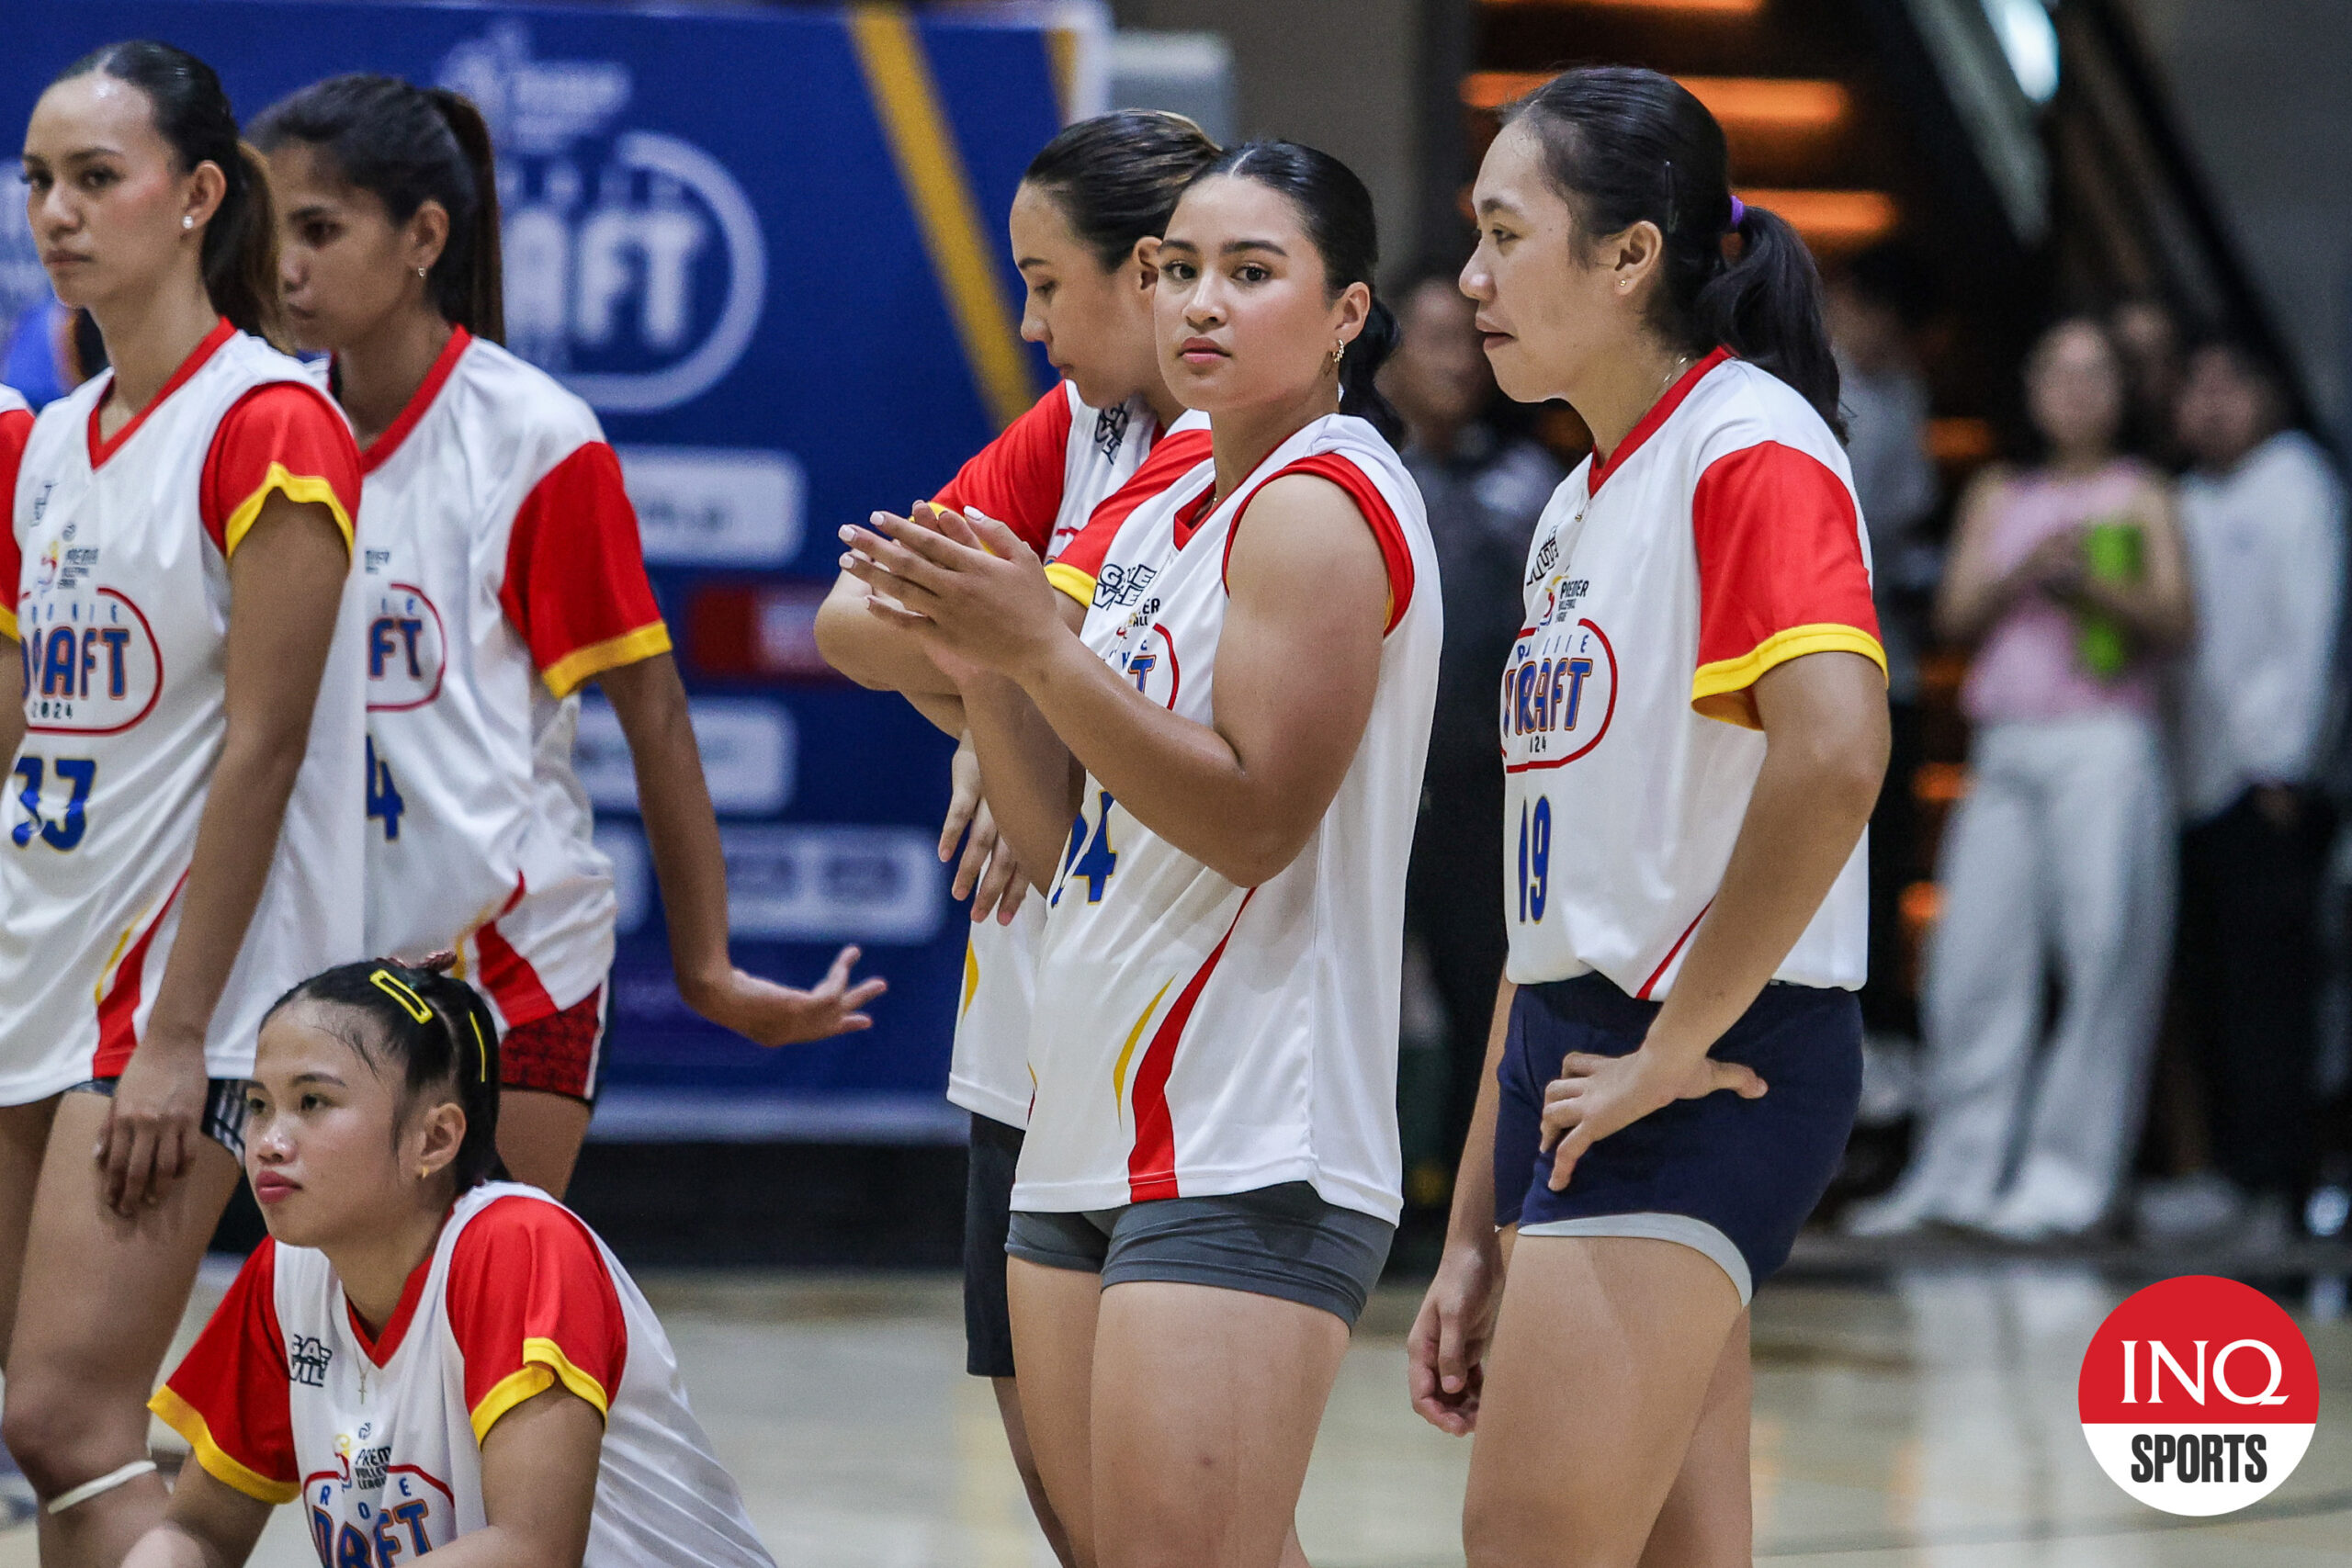 Canadian libero-Fil defended a spot on the PVL team